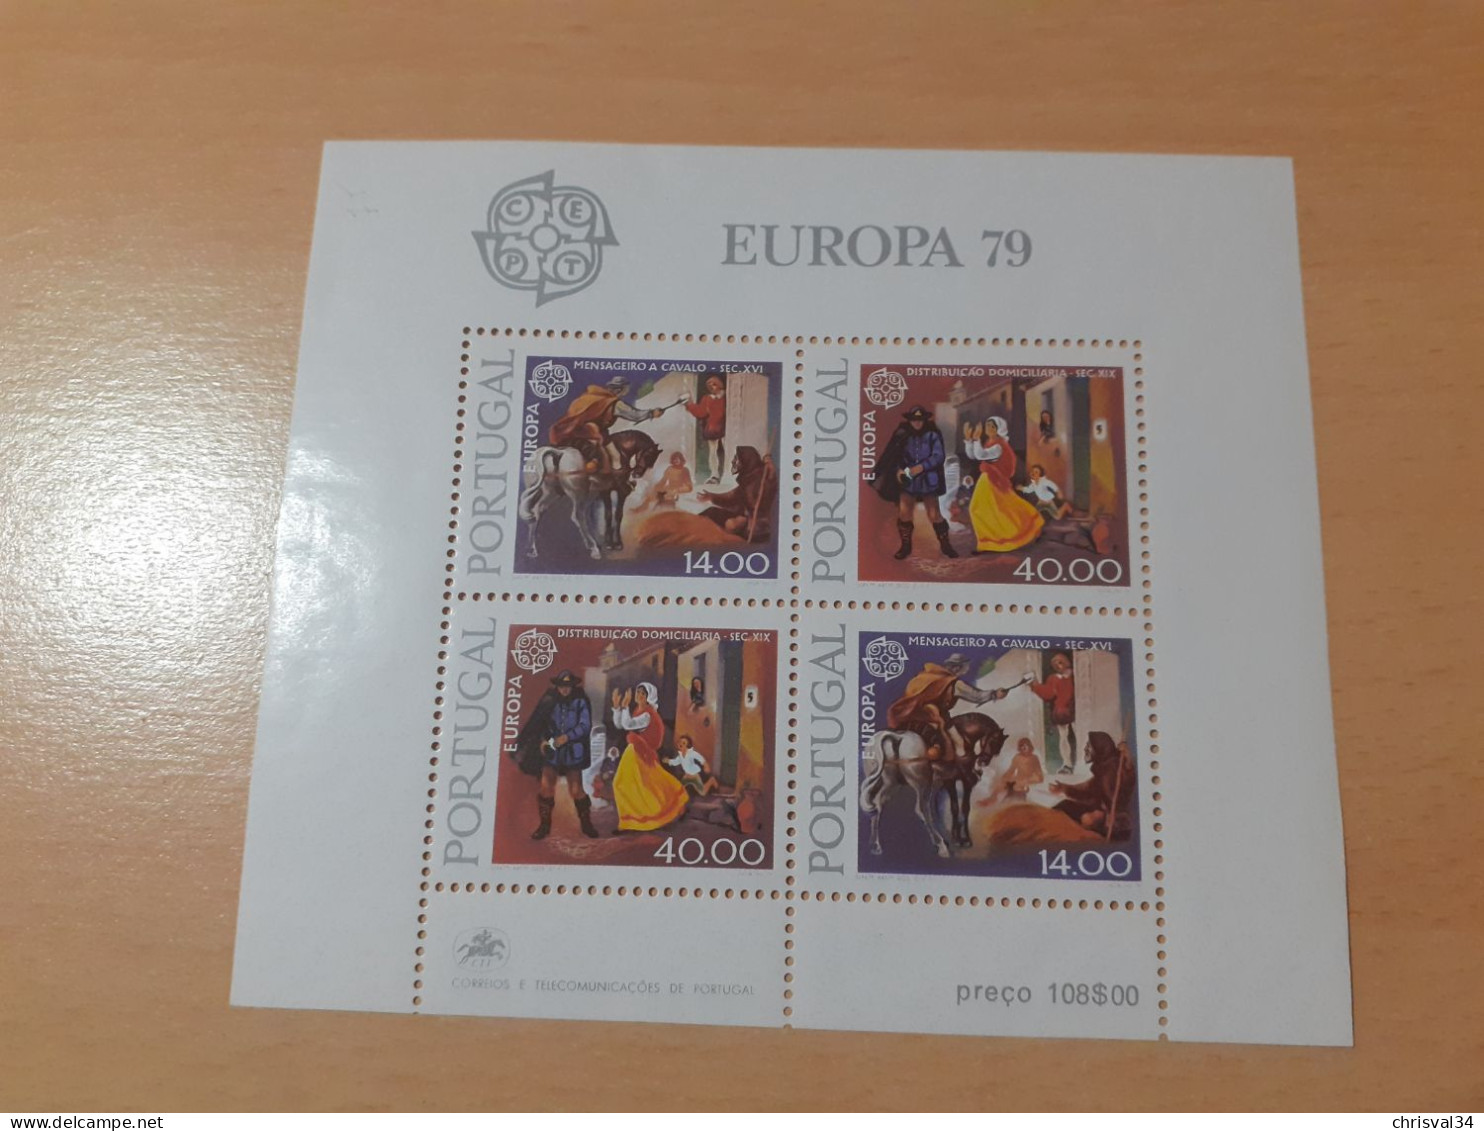 TIMBRES   EUROPA   1989   BF  PORTUGAL   N  27   COTE  12,00  EUROS    NEUFS  LUXE** - 1979